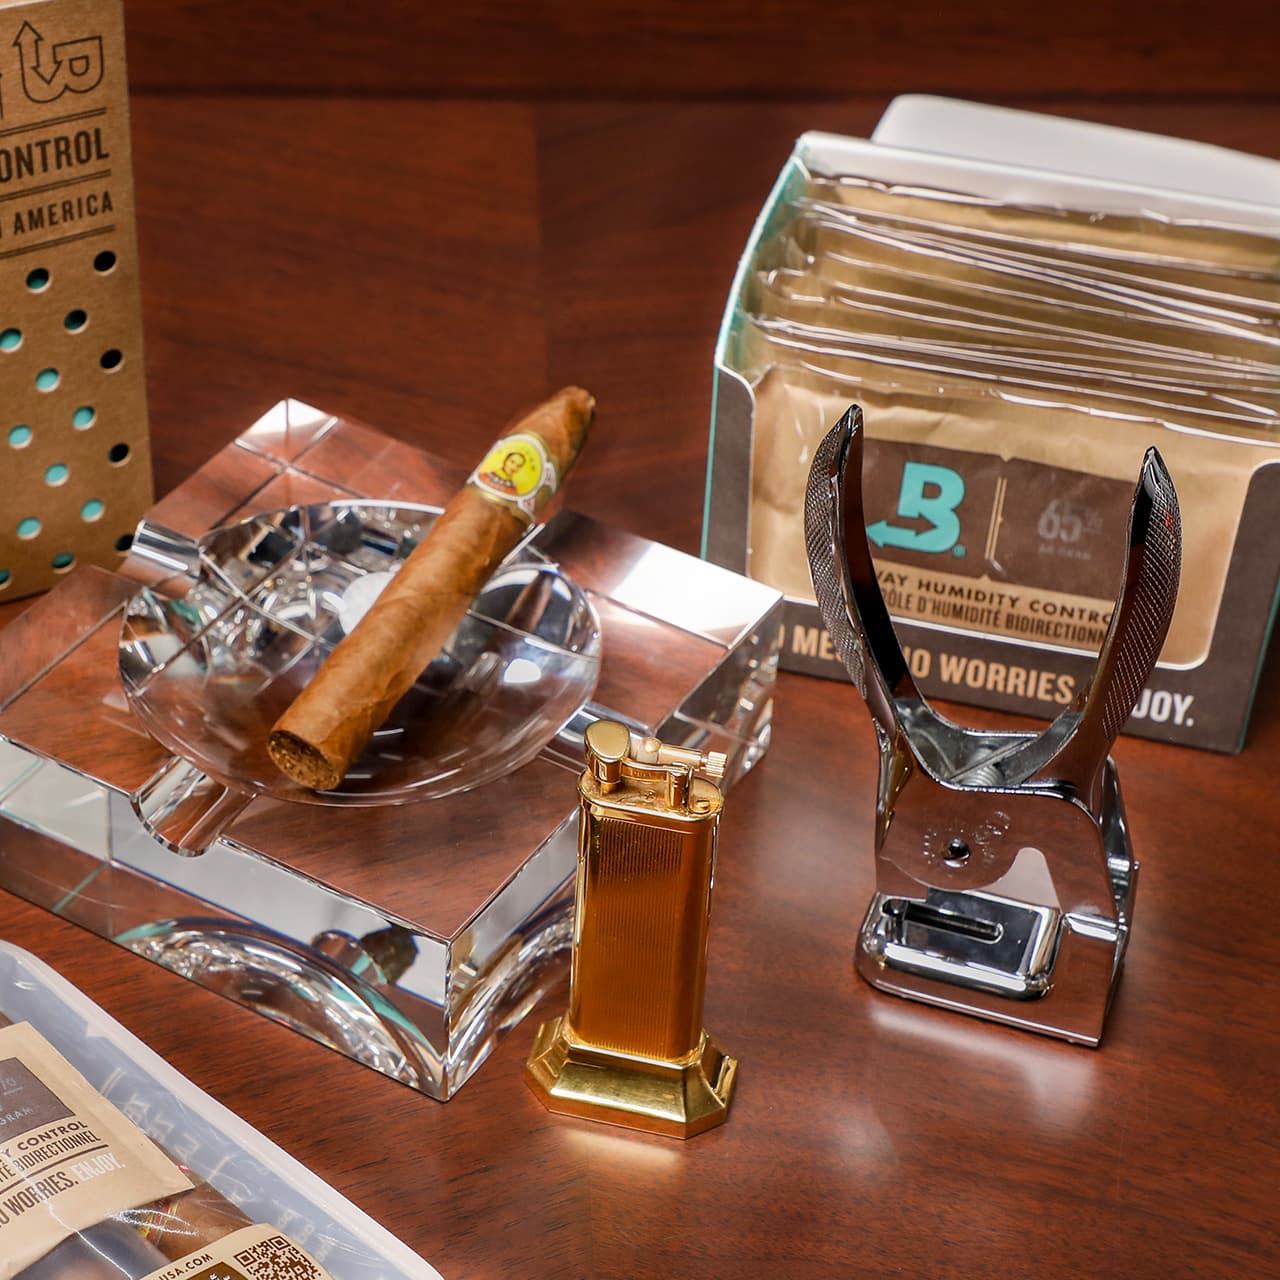 Close up image of a gold cigar lighter, a silver cigar cutter, and a glass ash tray with a cigar leaning on it, arranged on a brown wooden desk.